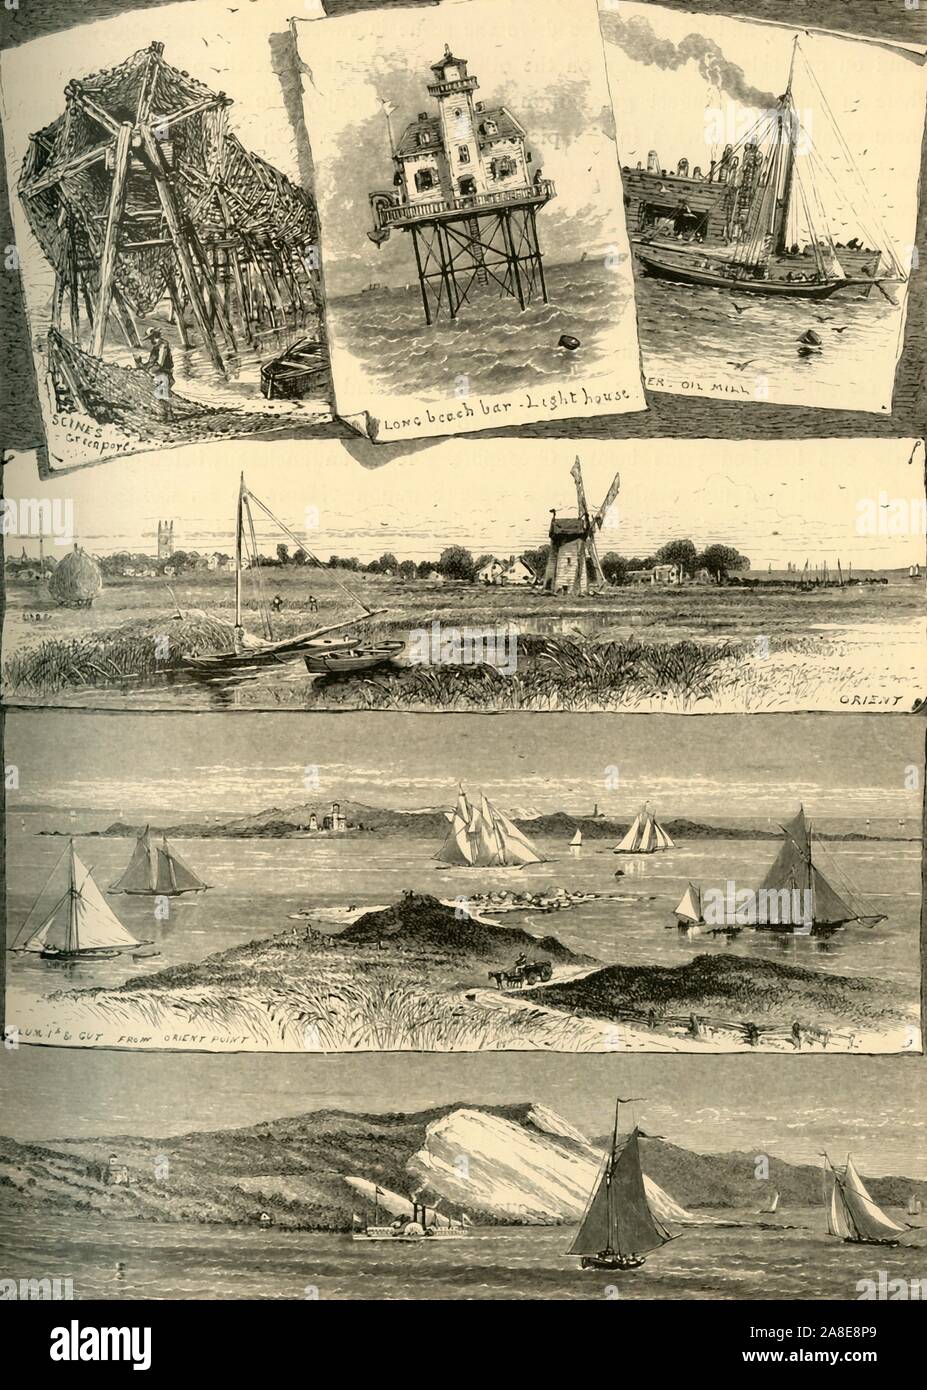 'Eastern Long Island Scenes', 1872. Views around Long Island, New York State, USA: 'Seines [fishing nets], Greenport; Long beach bar - lighthouse; oil mill, Orient; Plum Island &amp; Gut from Orient Point, (this name is popularly spelled &quot;Plum&quot;); White Hill, Shelter Island. From &quot;Picturesque America; or, The Land We Live In, A Delineation by Pen and Pencil of the Mountains, Rivers, Lakes...with Illustrations on Steel and Wood by Eminent American Artists&quot; Vol. I, edited by William Cullen Bryant. [D. Appleton and Company, New York, 1872] Stock Photo